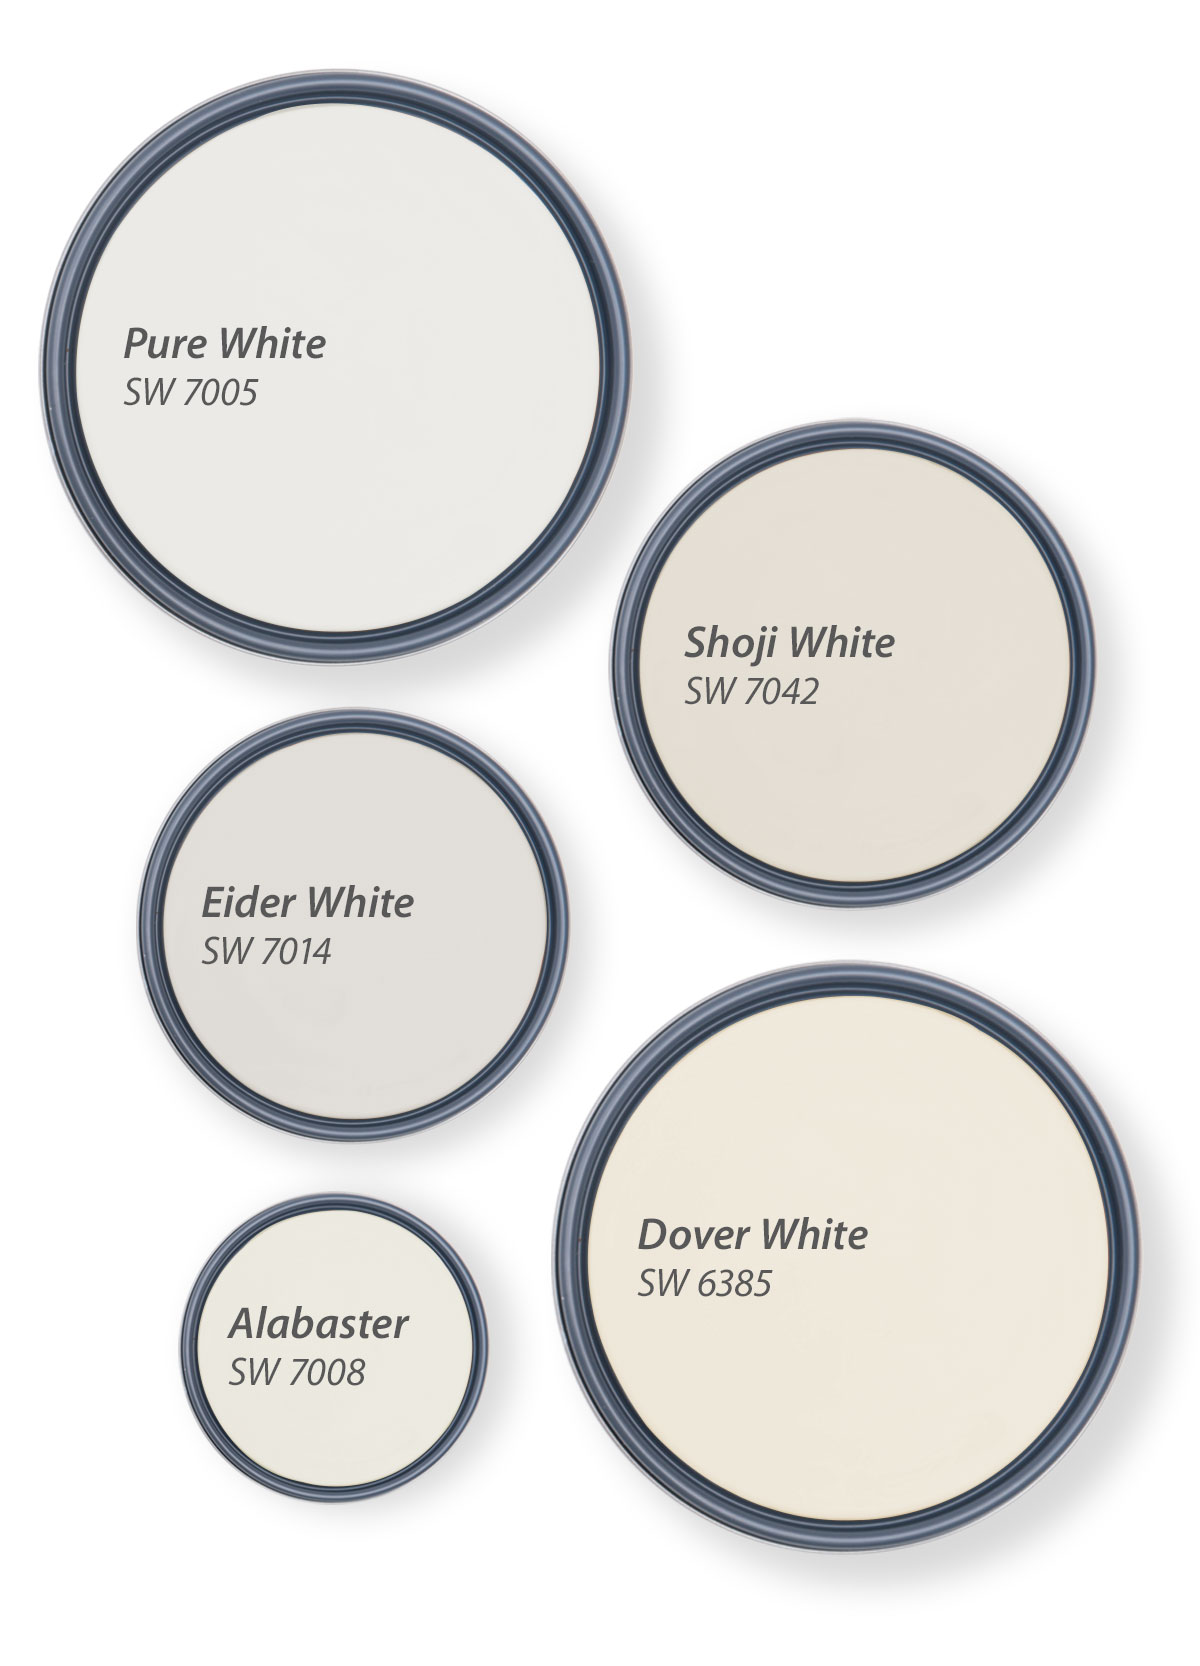 Best White Ceiling Color Sherwin Williams Shelly Lighting